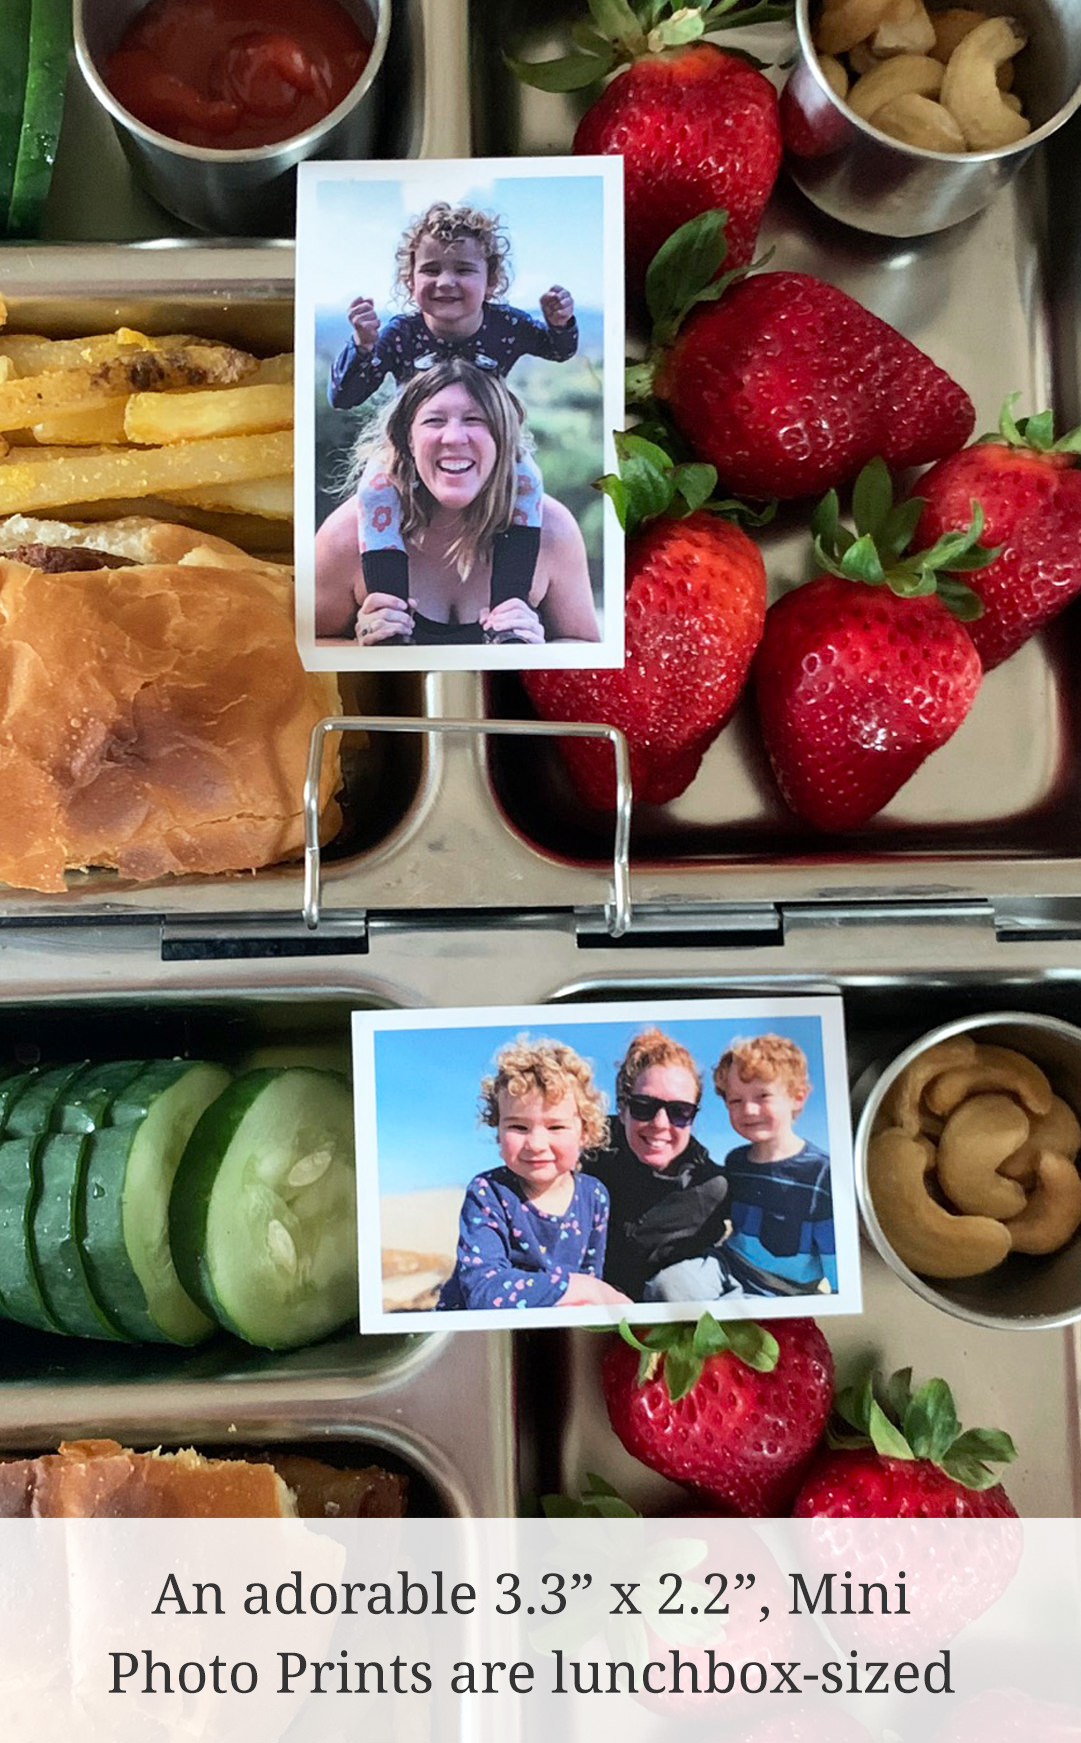 An adorable 3.3” x 2.2”, Mini Photo Prints are lunchbox-sized